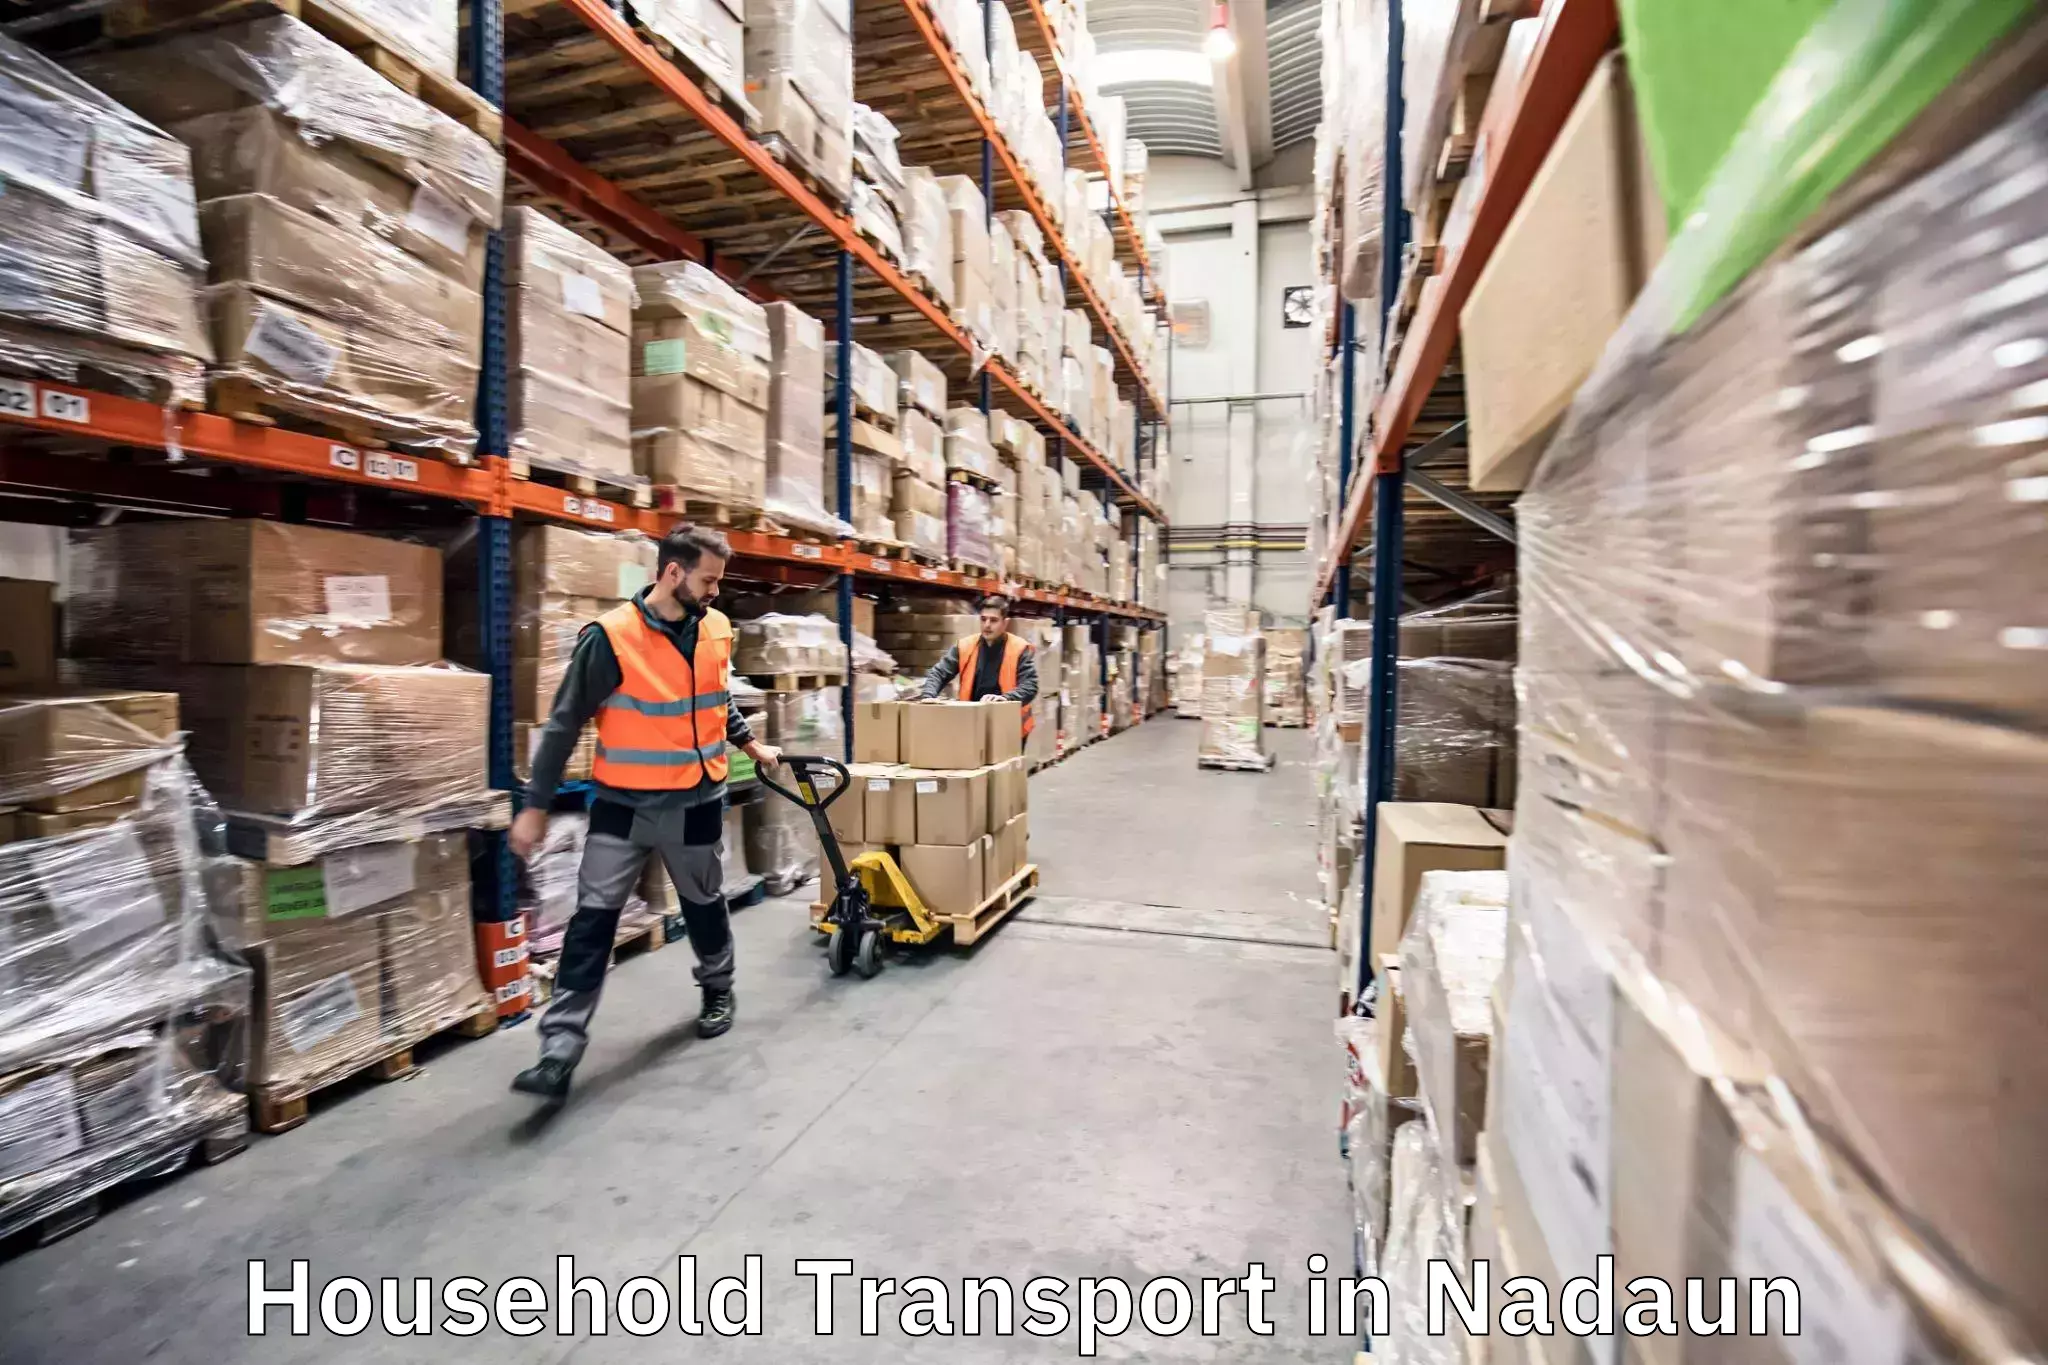 Household transport solutions in Nadaun